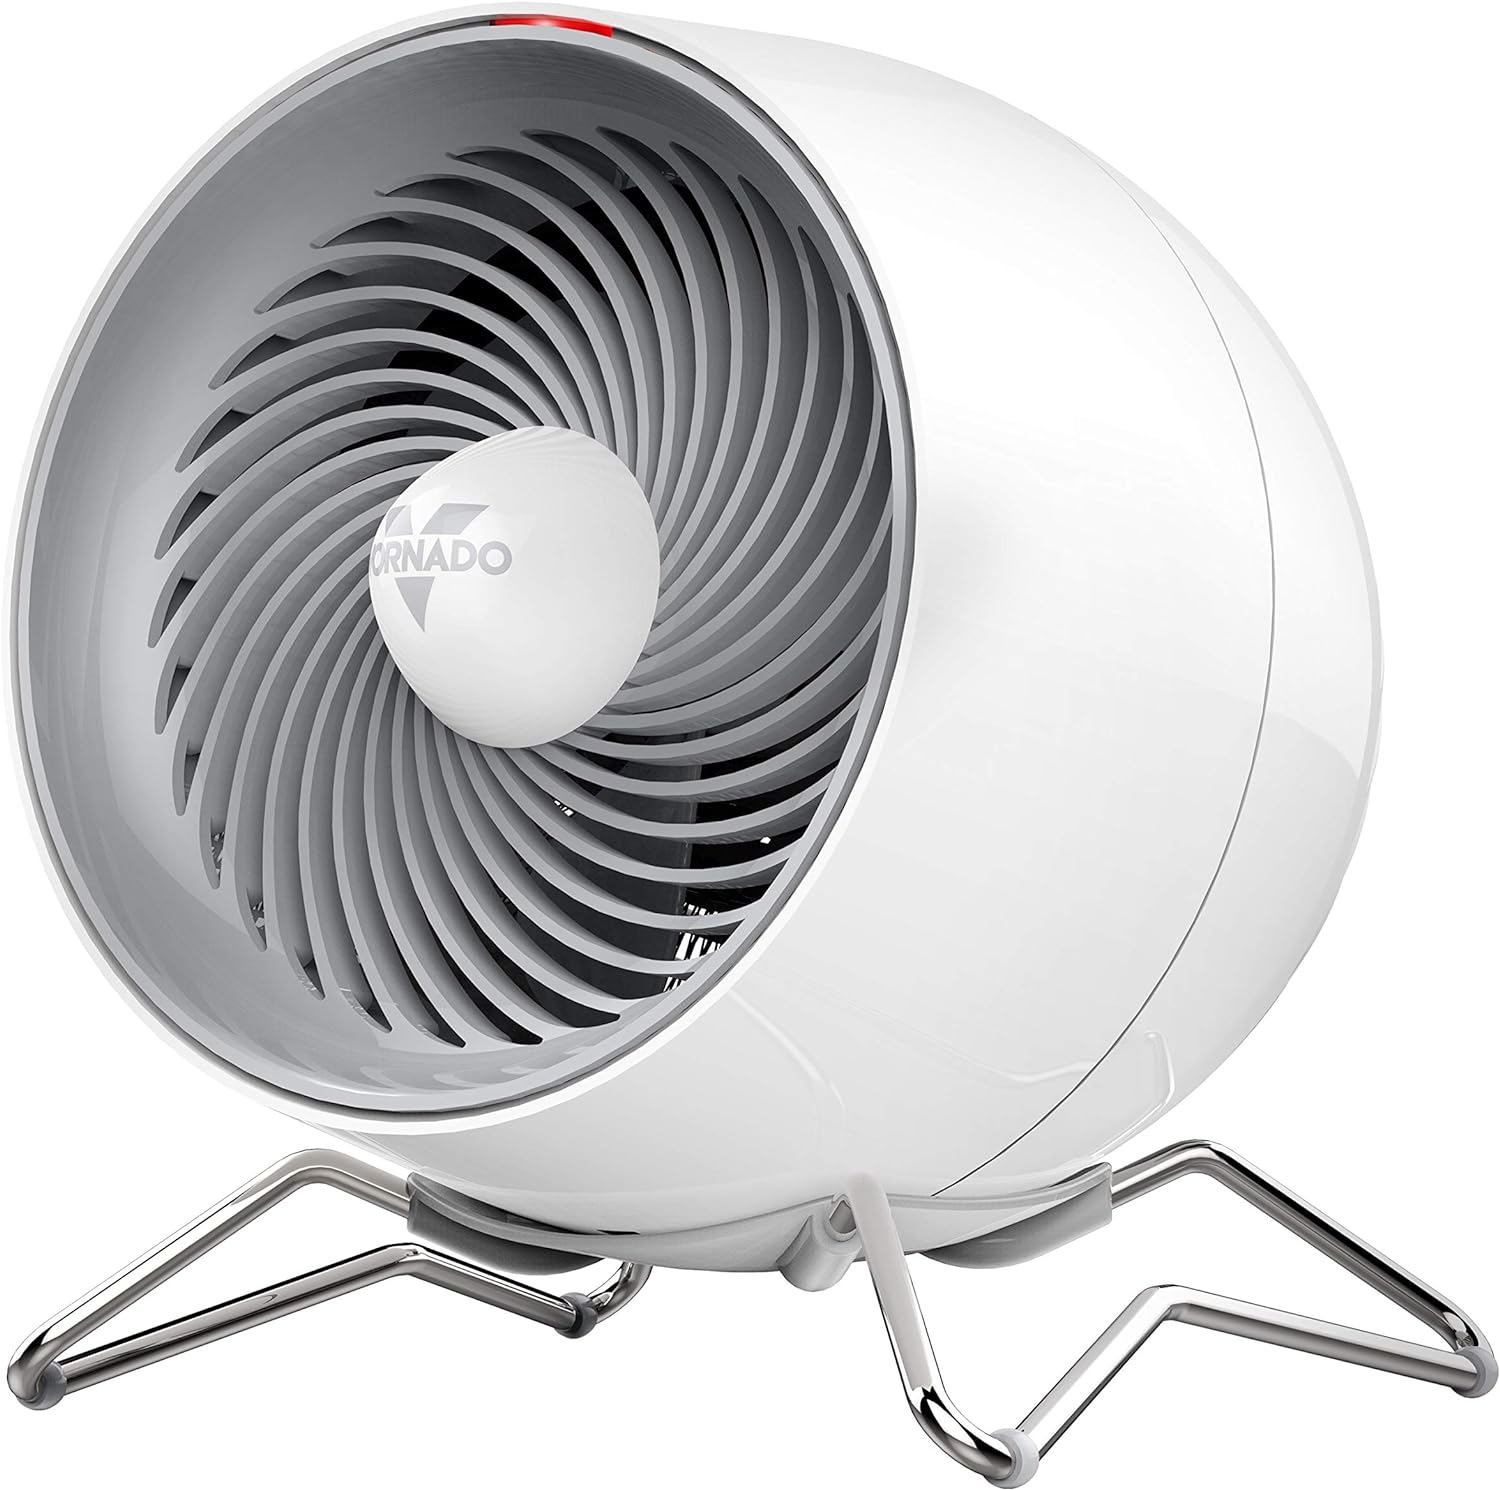 Vornado Pivot Heat Electric Space Heater with 20-Degrees of Tilt, Adjustable Thermostat, Advanced Safety Features, for Home and Office, White